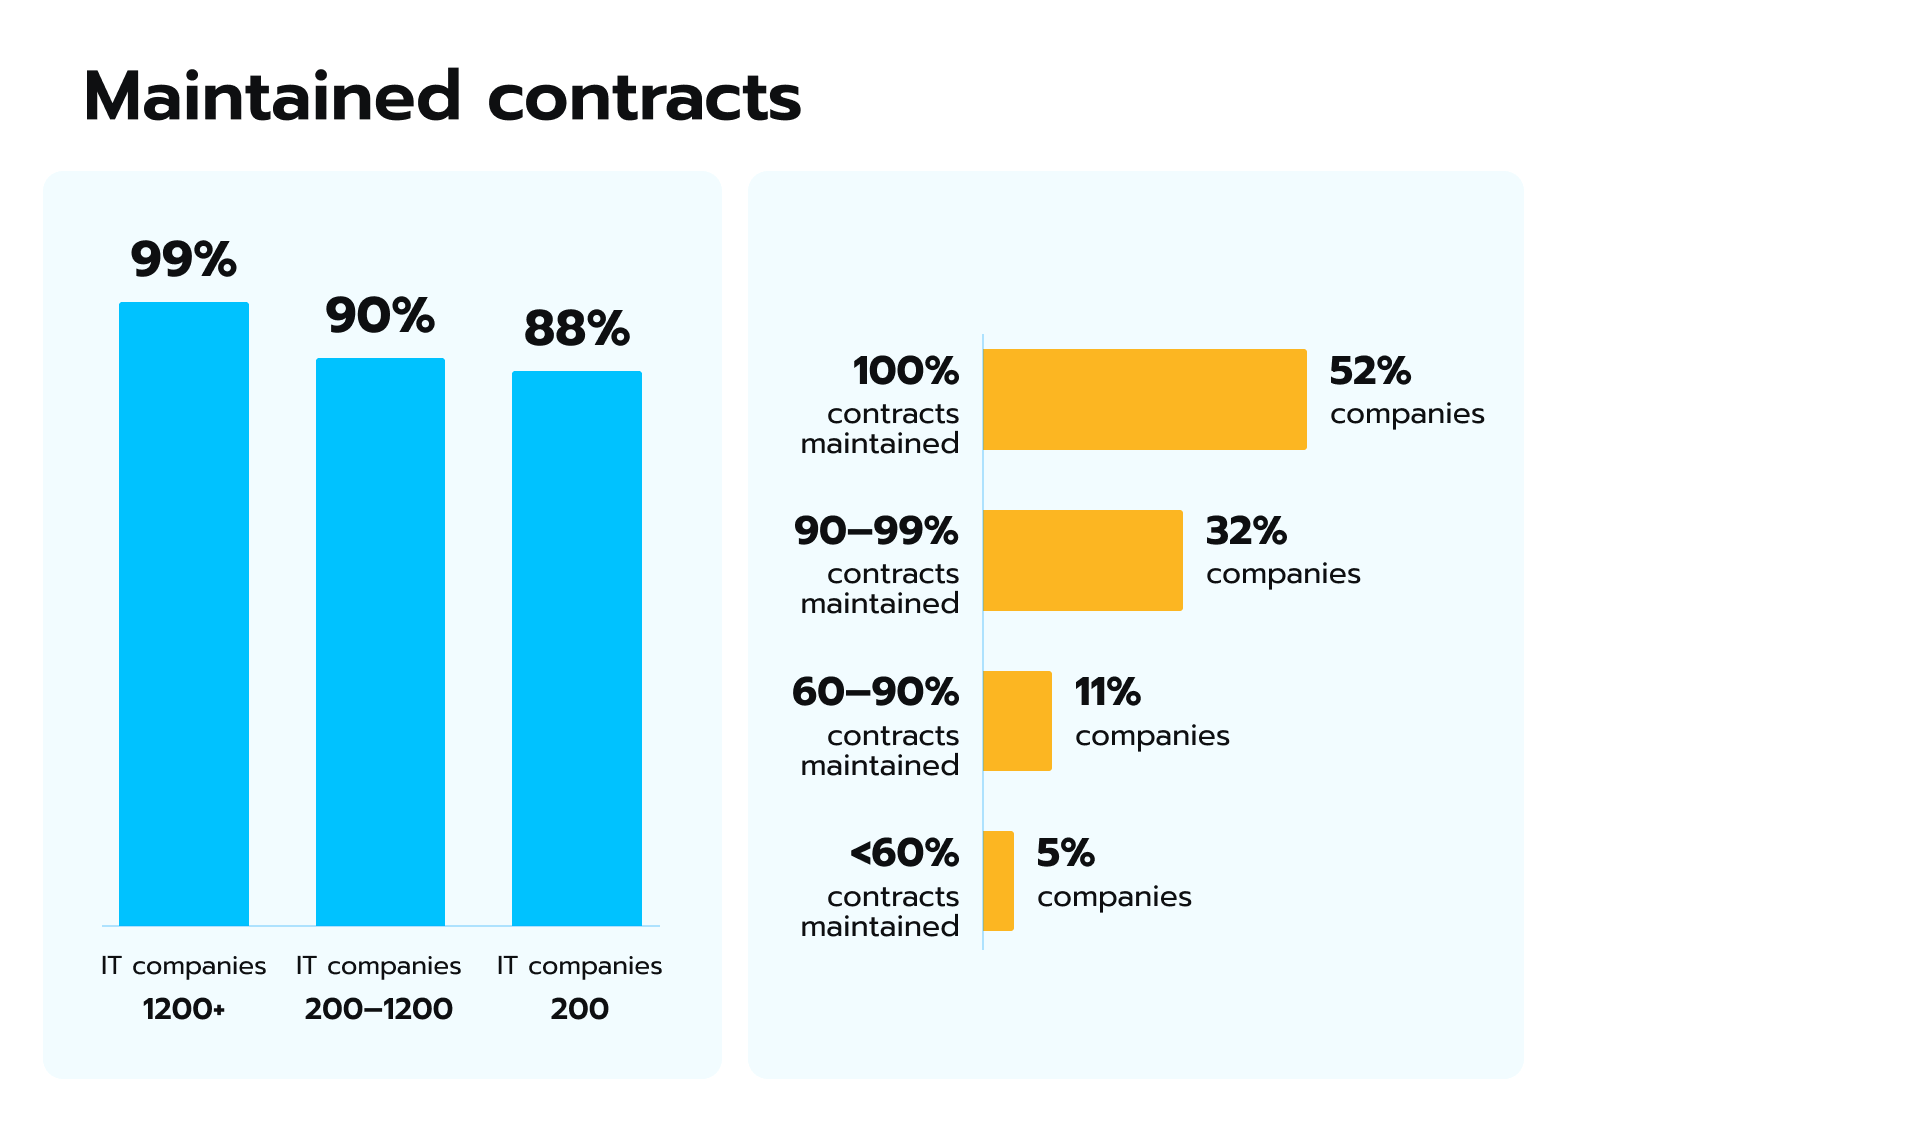 . The percentage of contracts maintained by the Ukrainian IT companies